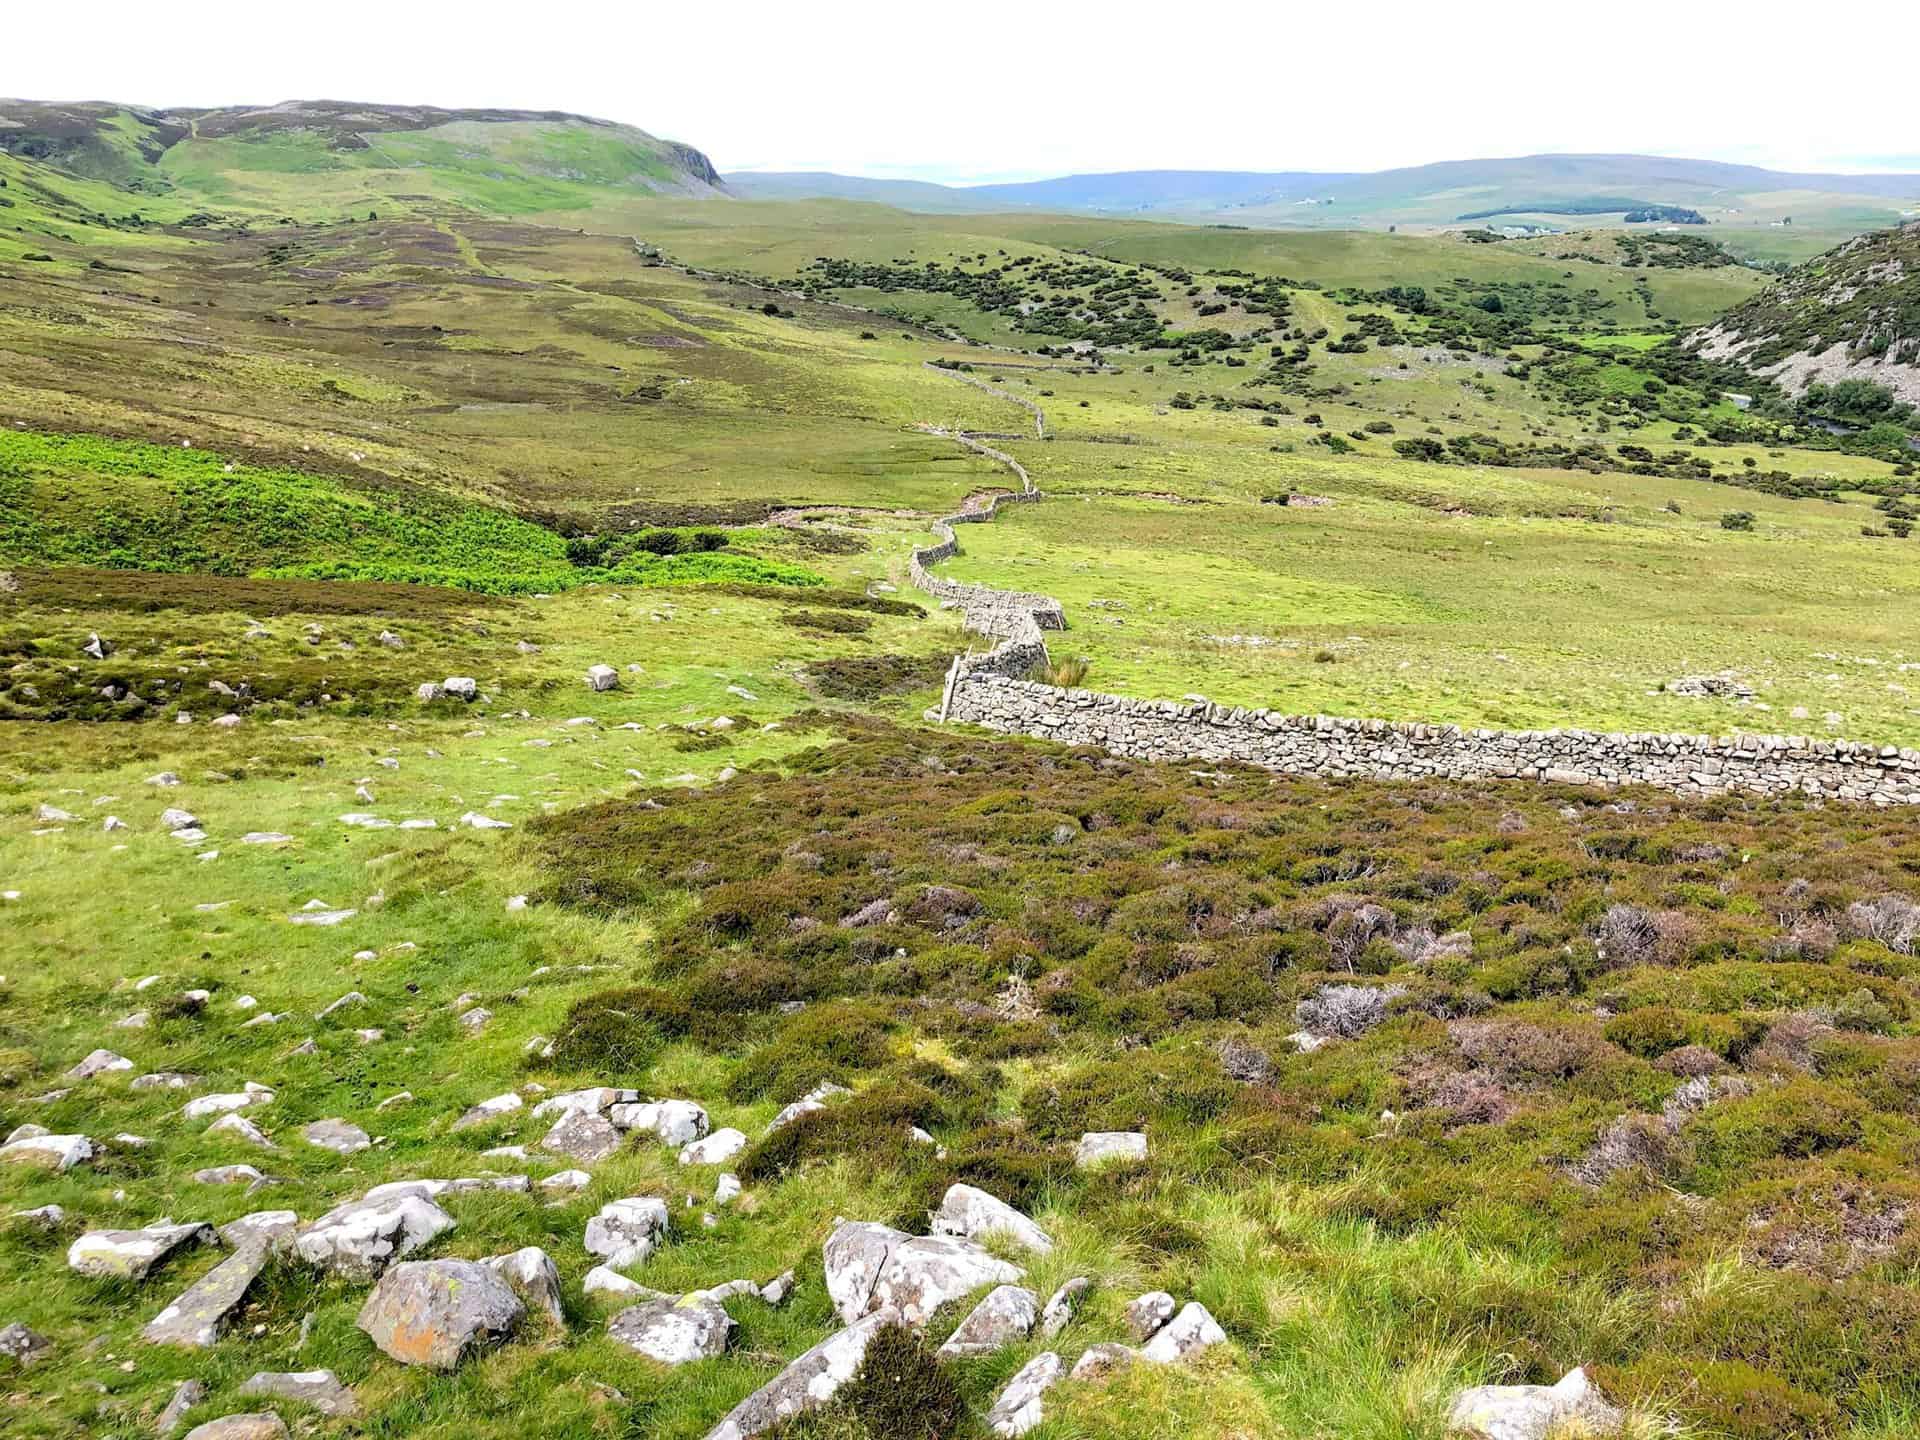 The expansive view north-west over Upper Teesdale reveals a landscape rich in natural beauty and diverse habitats.